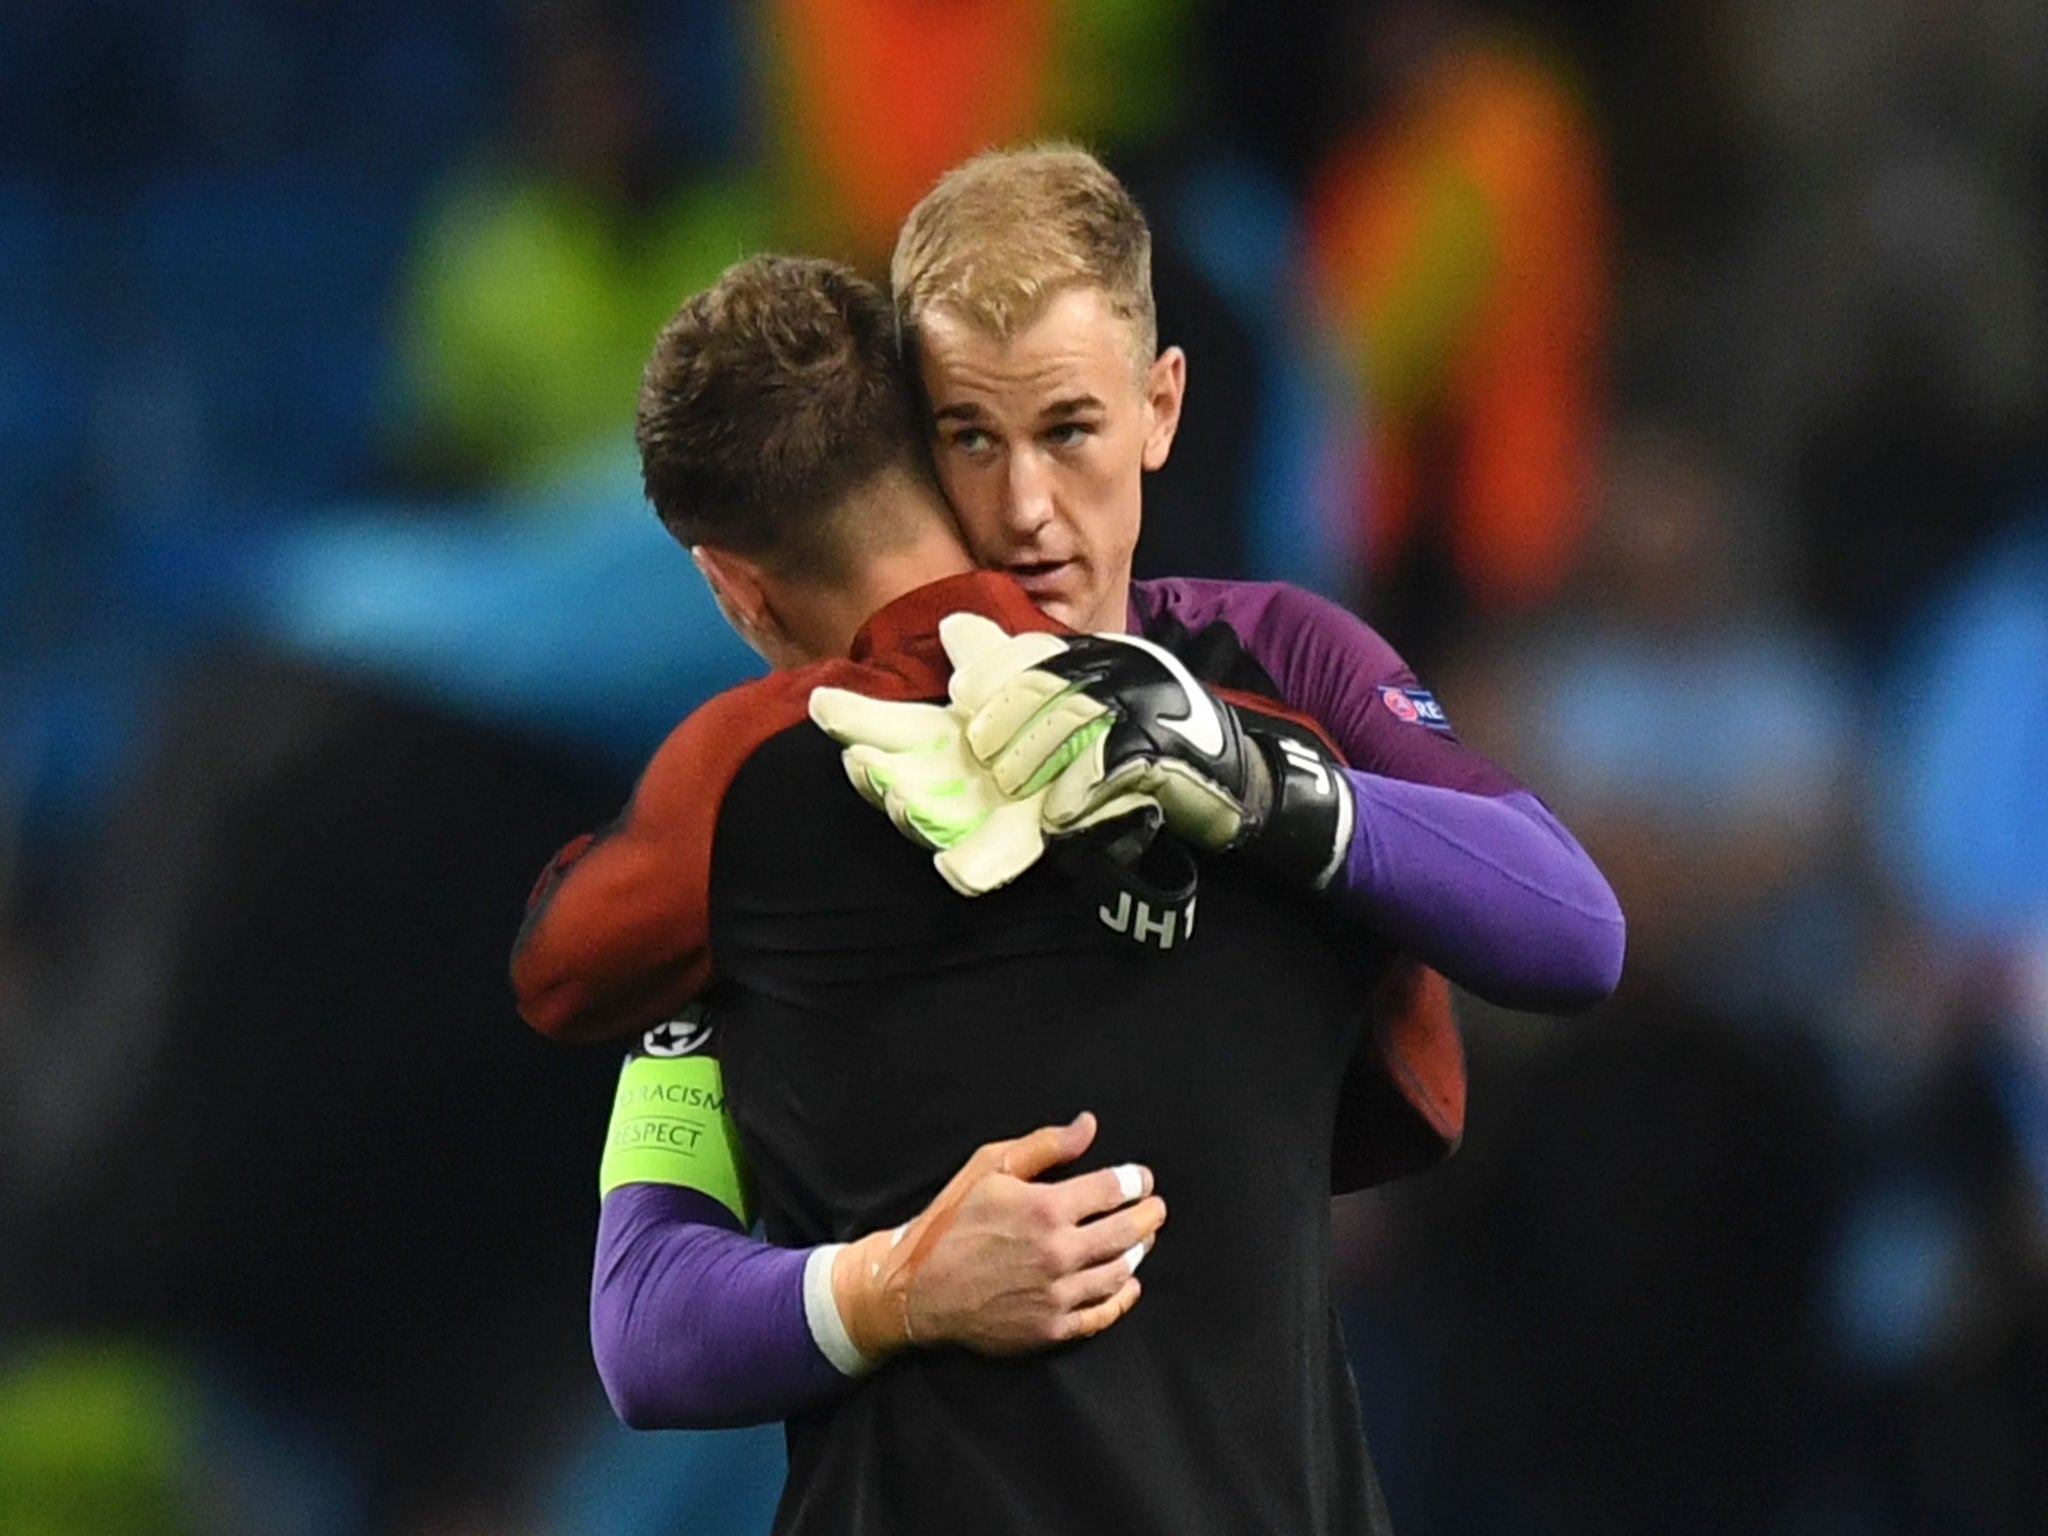 Joe Hart had an emotional night – which may be his last – in front of the Etihad crowd